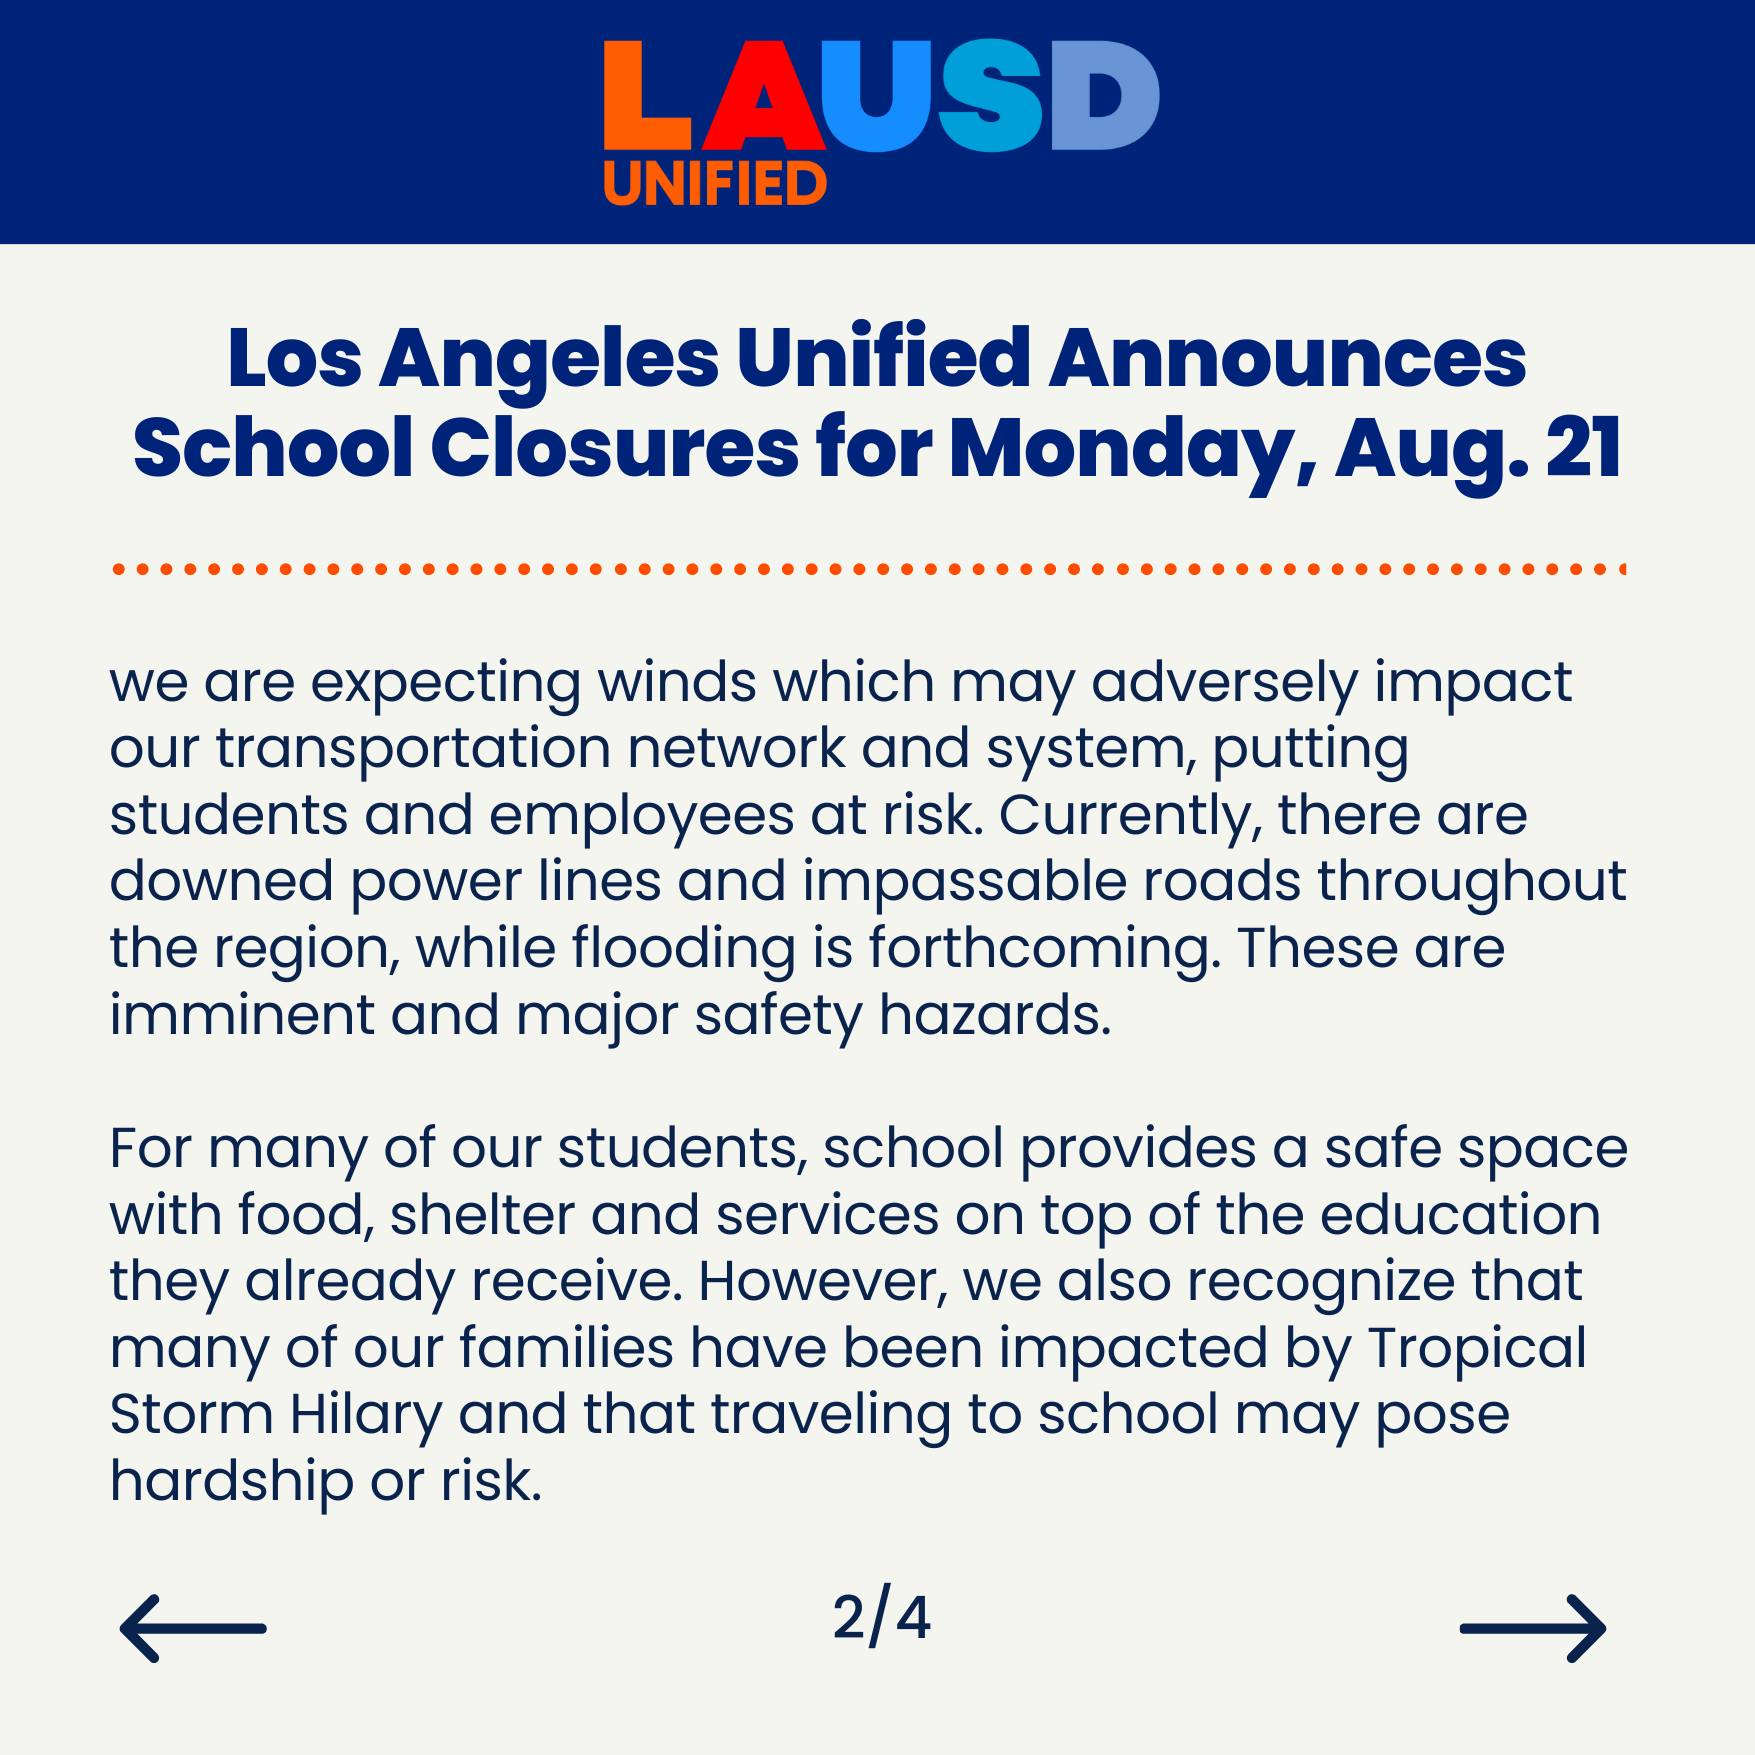 Los Angeles Unified School District will be Closing Schools